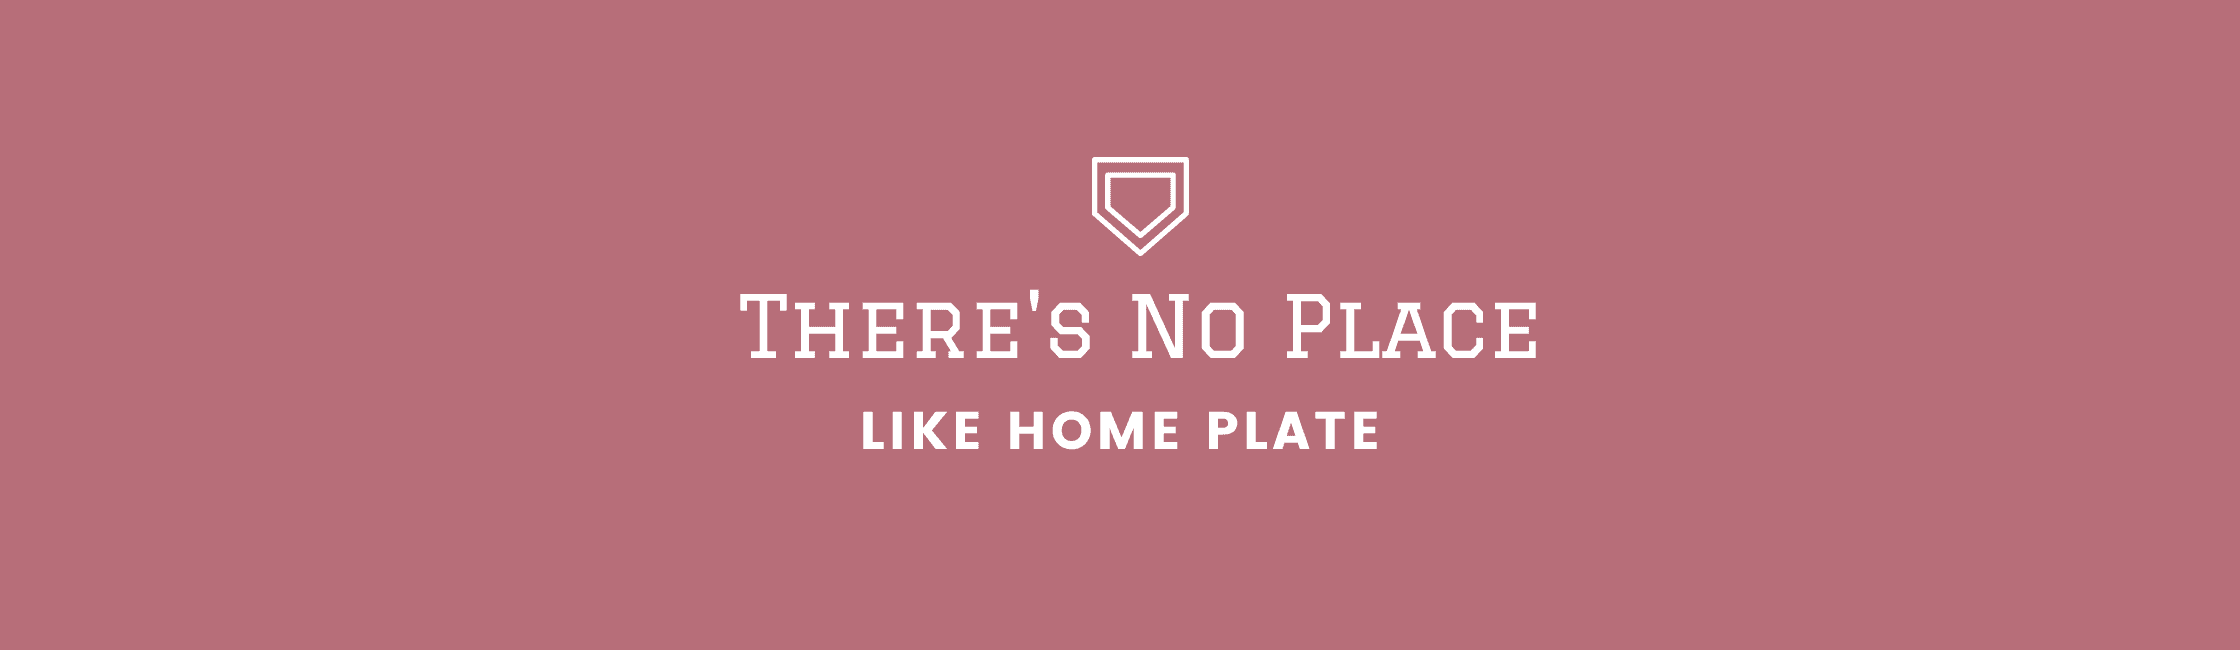 There's No Place Like Home Plate